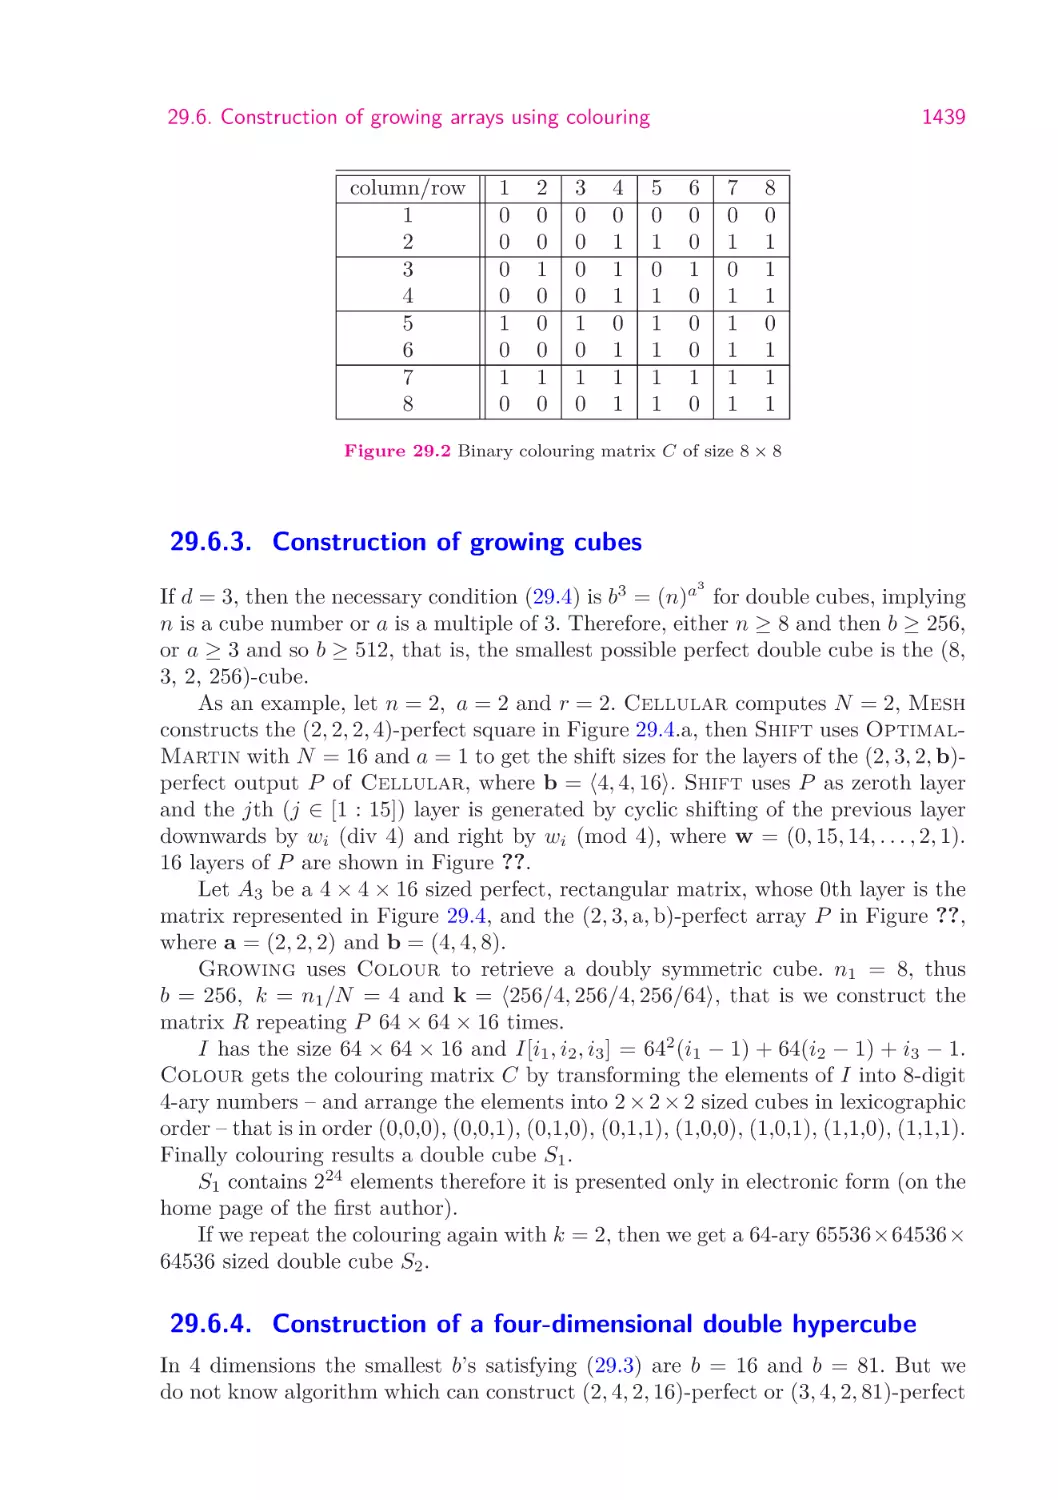 29.6.3.  Construction of growing cubes
29.6.4.  Construction of a four-dimensional double hypercube